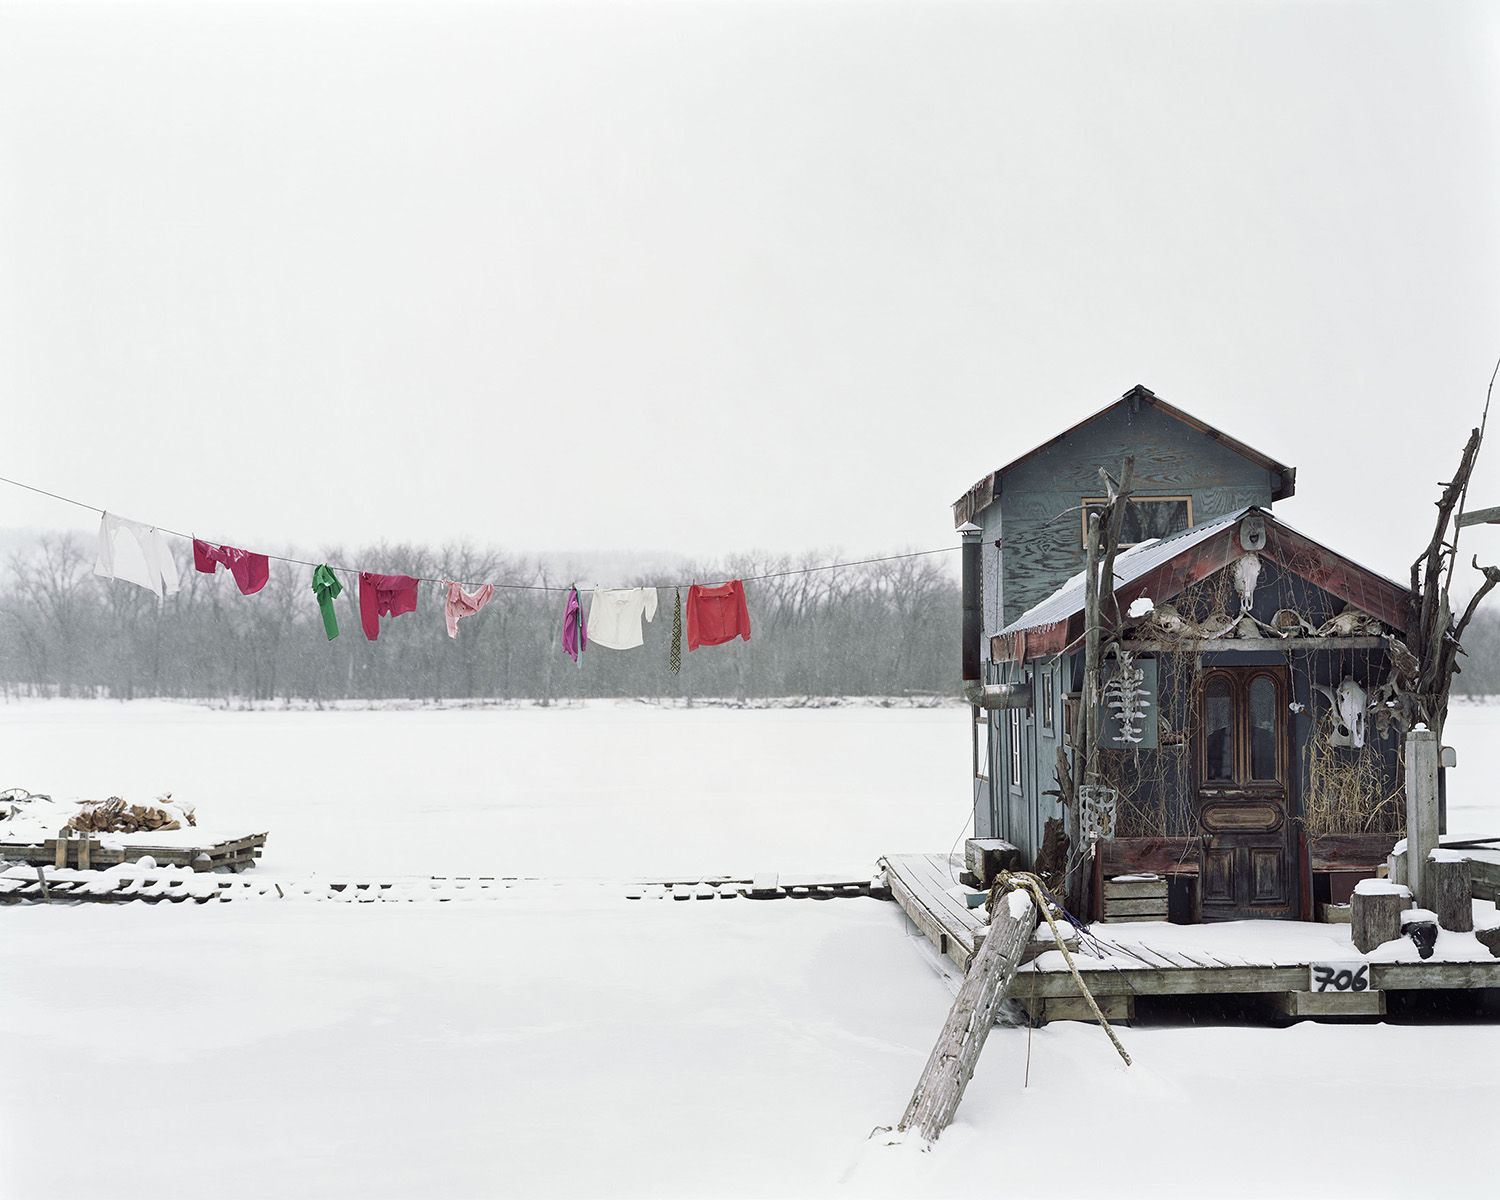 A houseboat on a snowy landscape, with a multi-colored clothing hanging from a clothesline